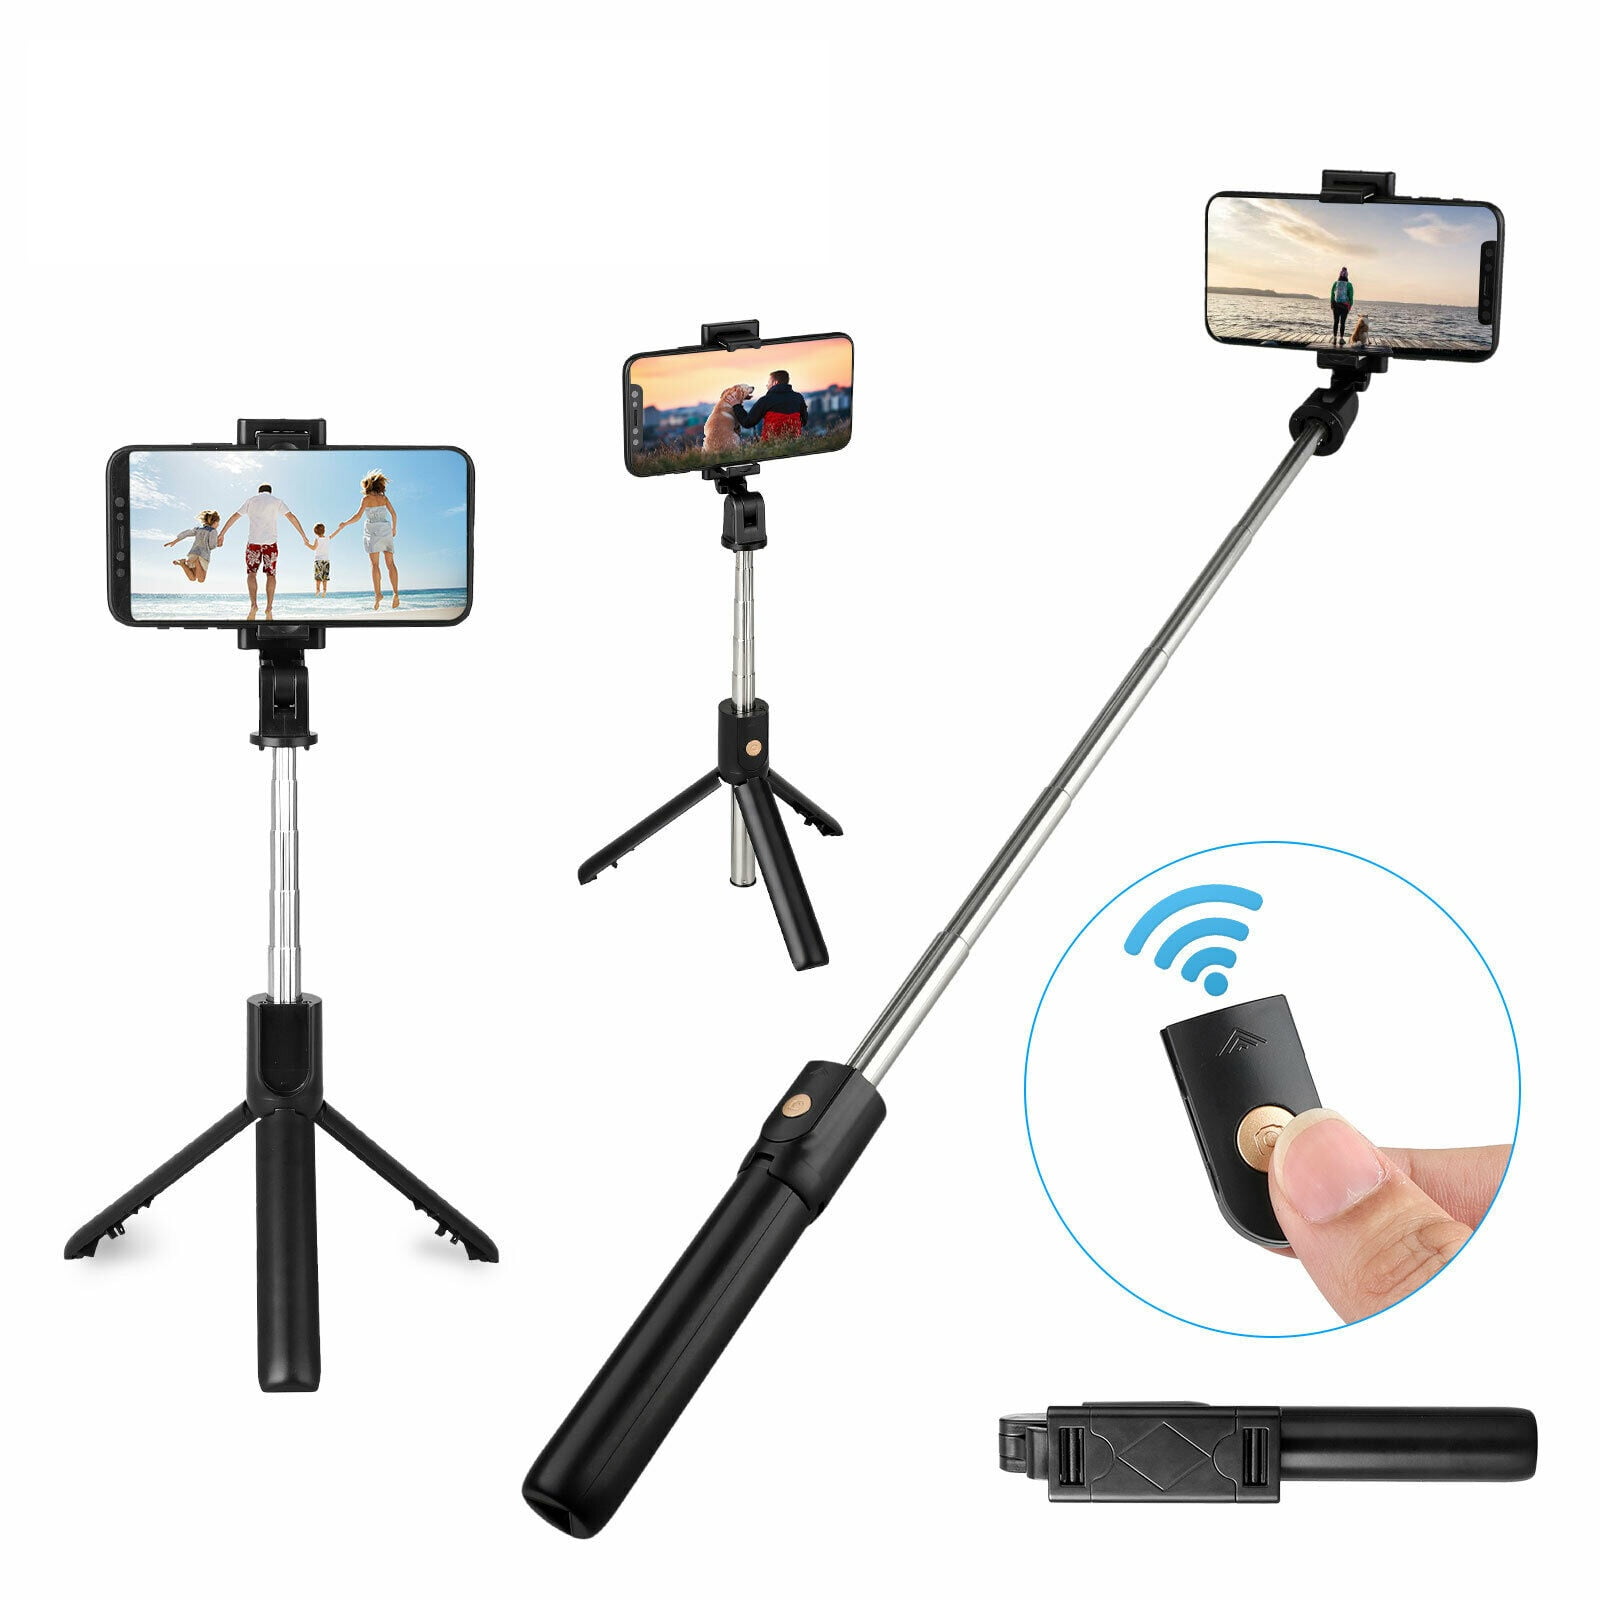 Bluetooth Selfie Stick with Tripod Extendable Compact Phone Stick with Wireless Remote and Extra Shutte Stand for iPhone 8 Plus/Xs Max/XR Galaxy Note 9/S10/S9 Huawei More iOS&Android Black